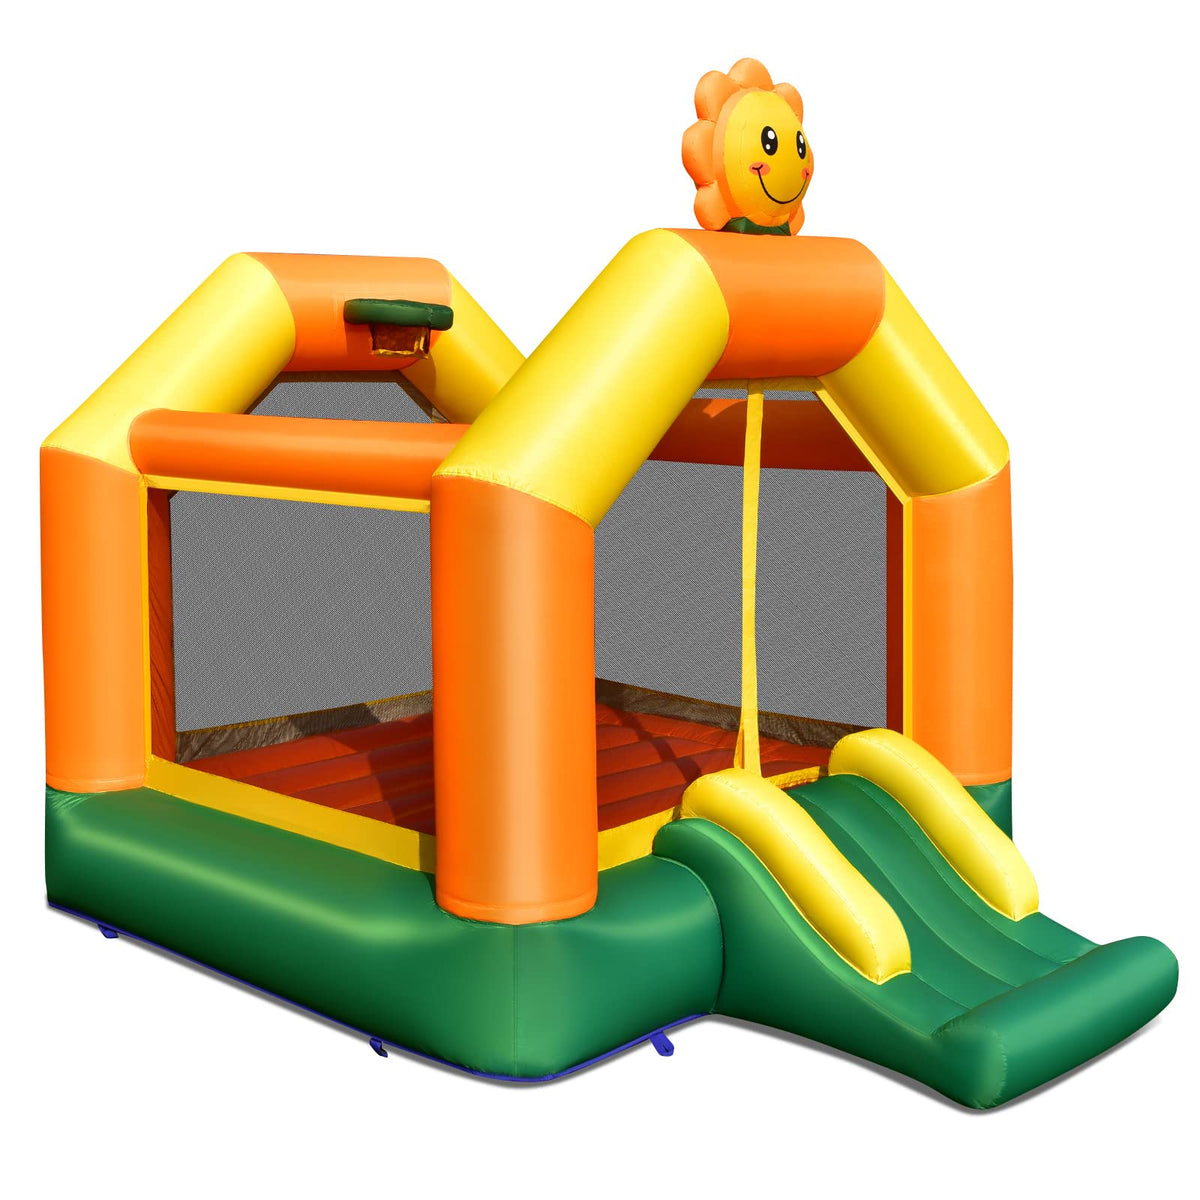 Inflatable Bounce House, Sunflower Theme Jumping Slide Bouncer w/Jumping Area